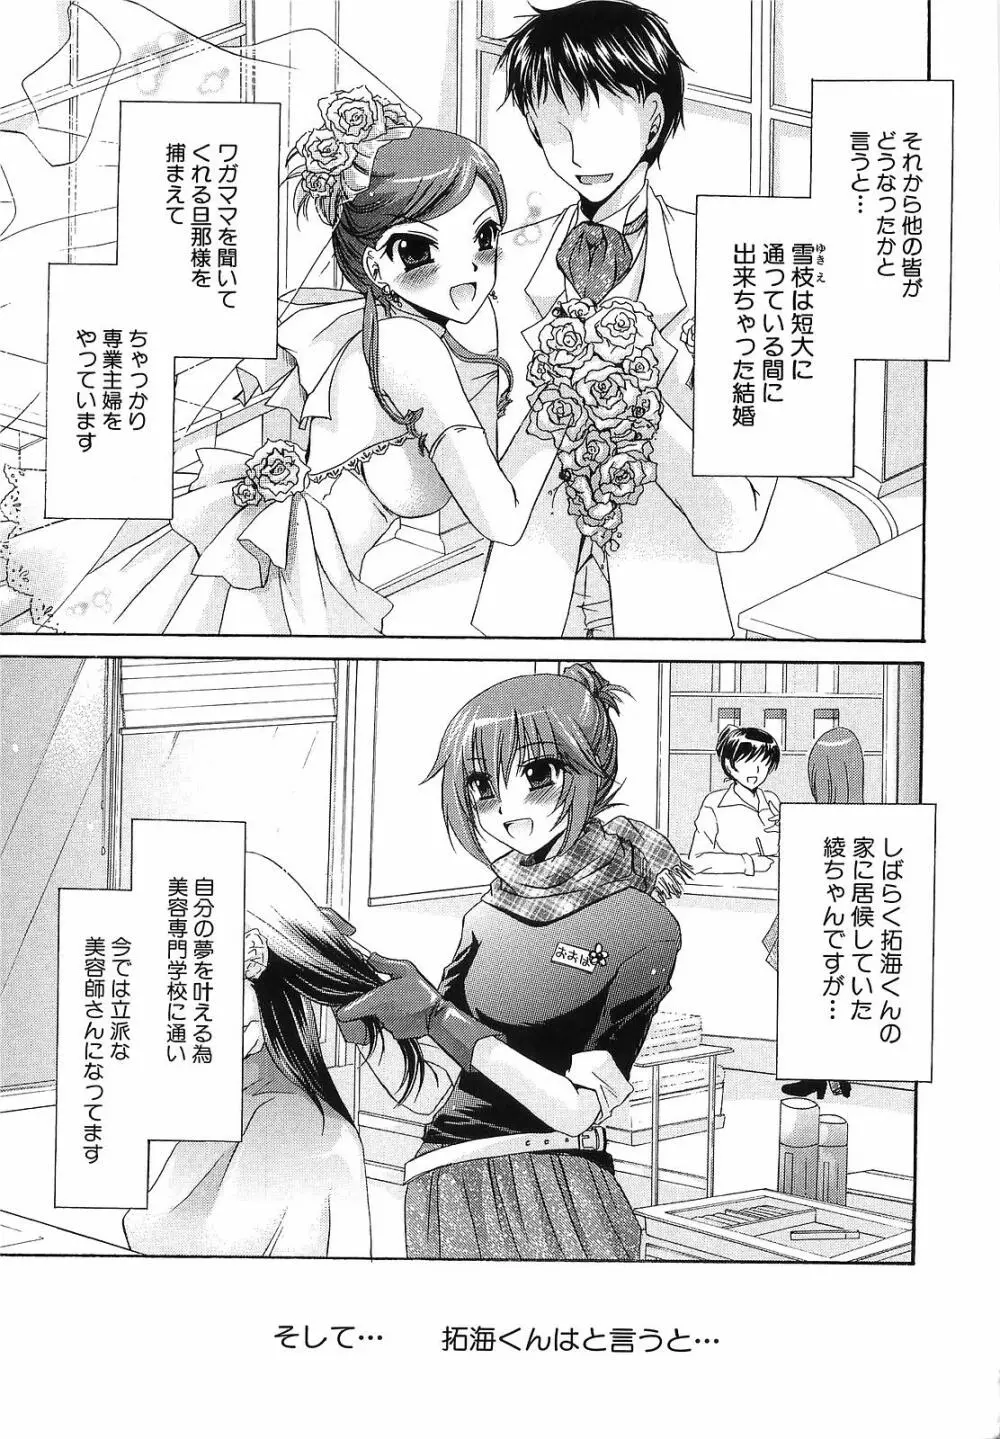 LOVE & HATE 3 FINAL～ENGAGE～通常版 Page.222